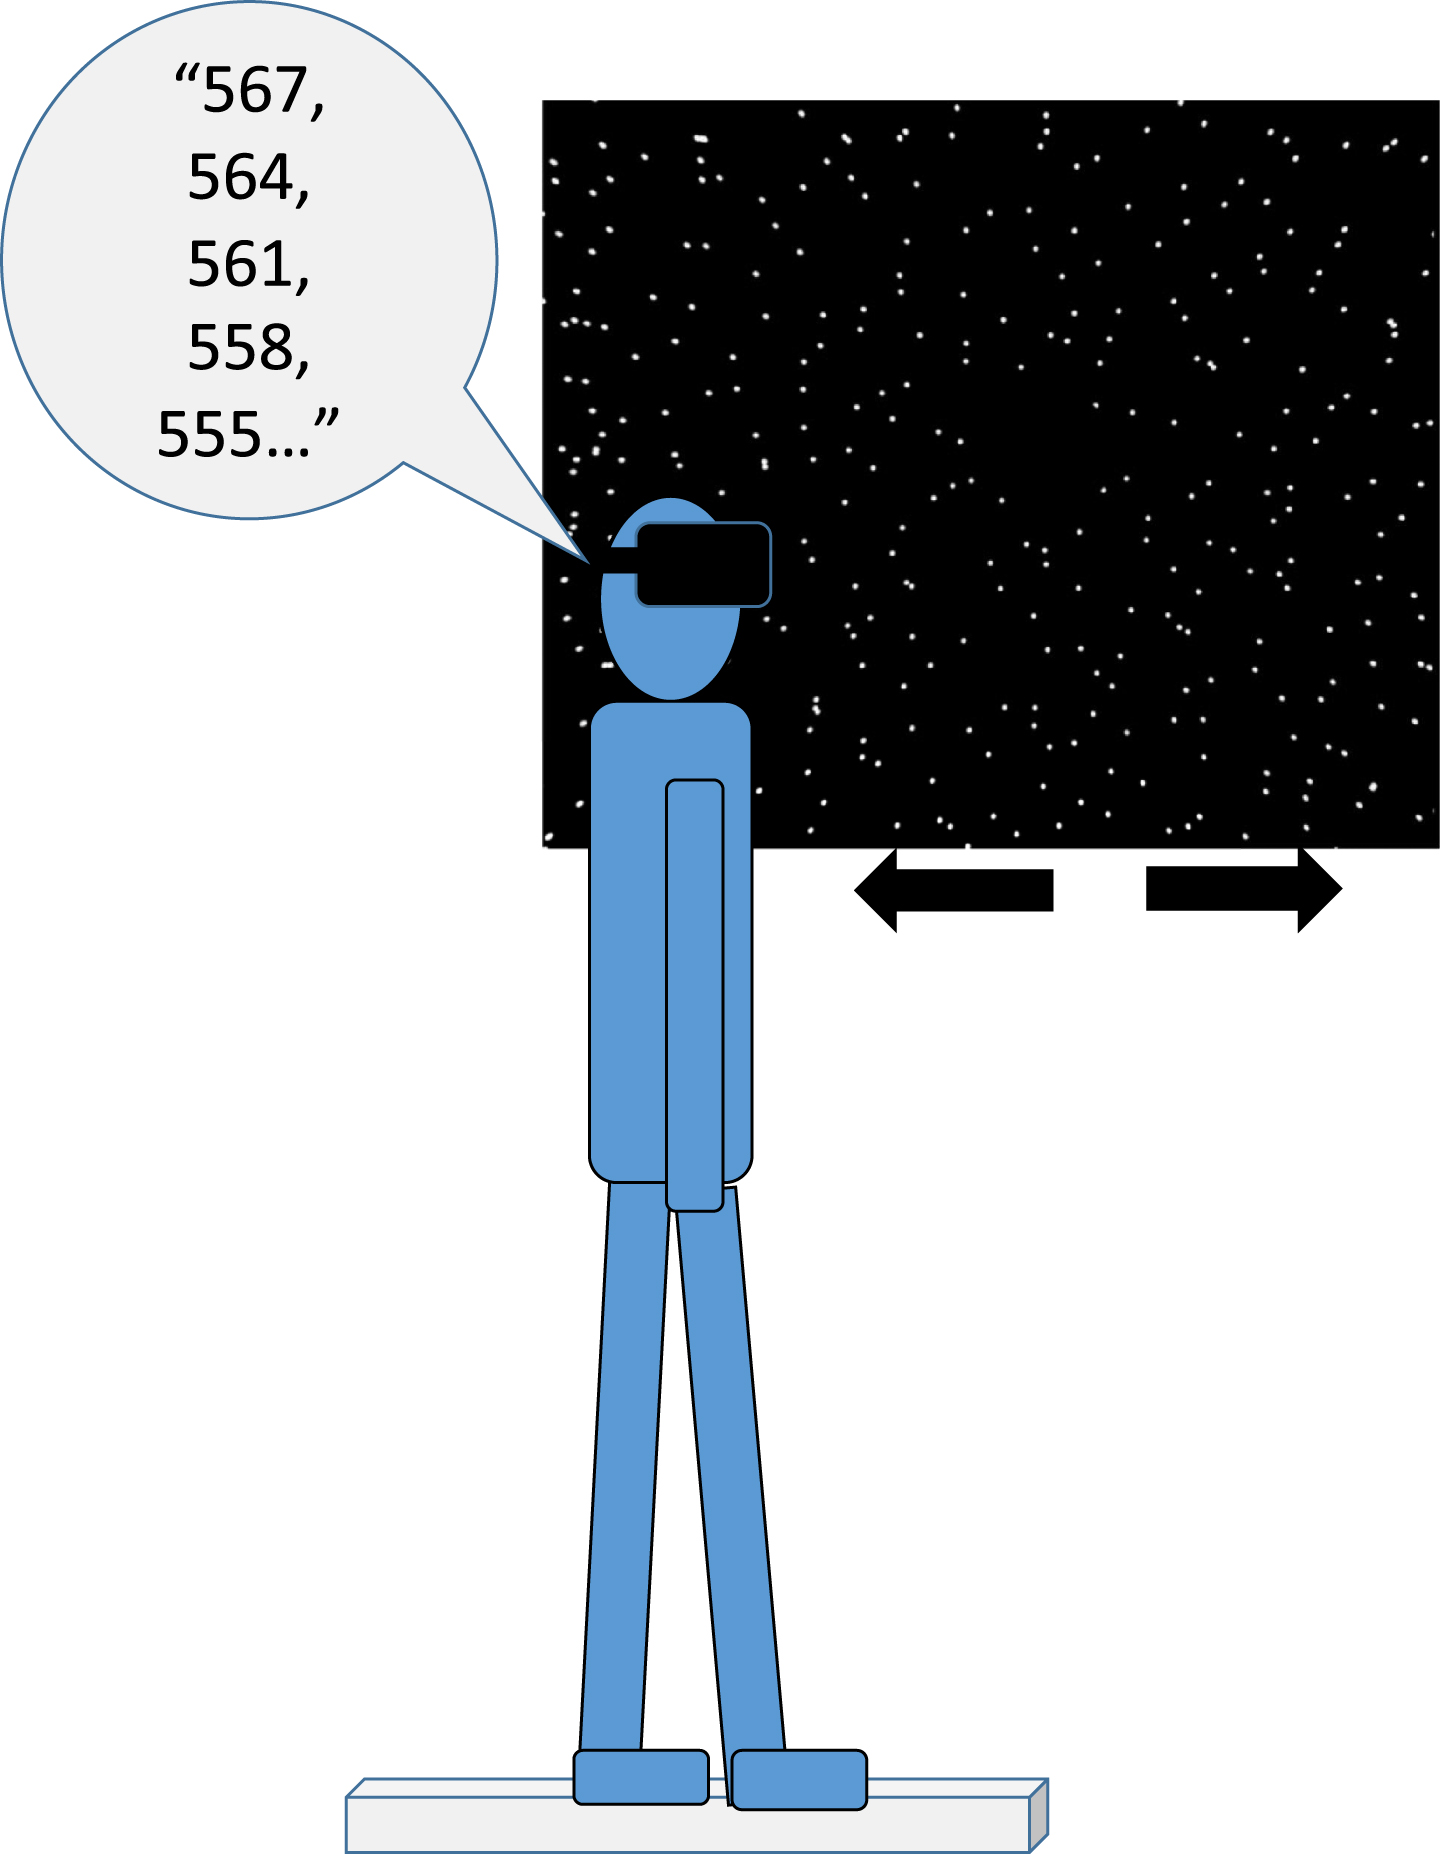 Experimental setup: A participant is standing on a force-platform in a tandem (heel-to-toes) position for 20 seconds while wearing the HTC Vive headset. He / she is asked to maintain their balance when observing spheres that are either static or moving anteroposterior at a frequency of 0.2 Hz and an amplitude of 5 or 32 mm. On half the trials, the participant, out loud, repeatedly subtracts 3 starting from a 3-digit number.